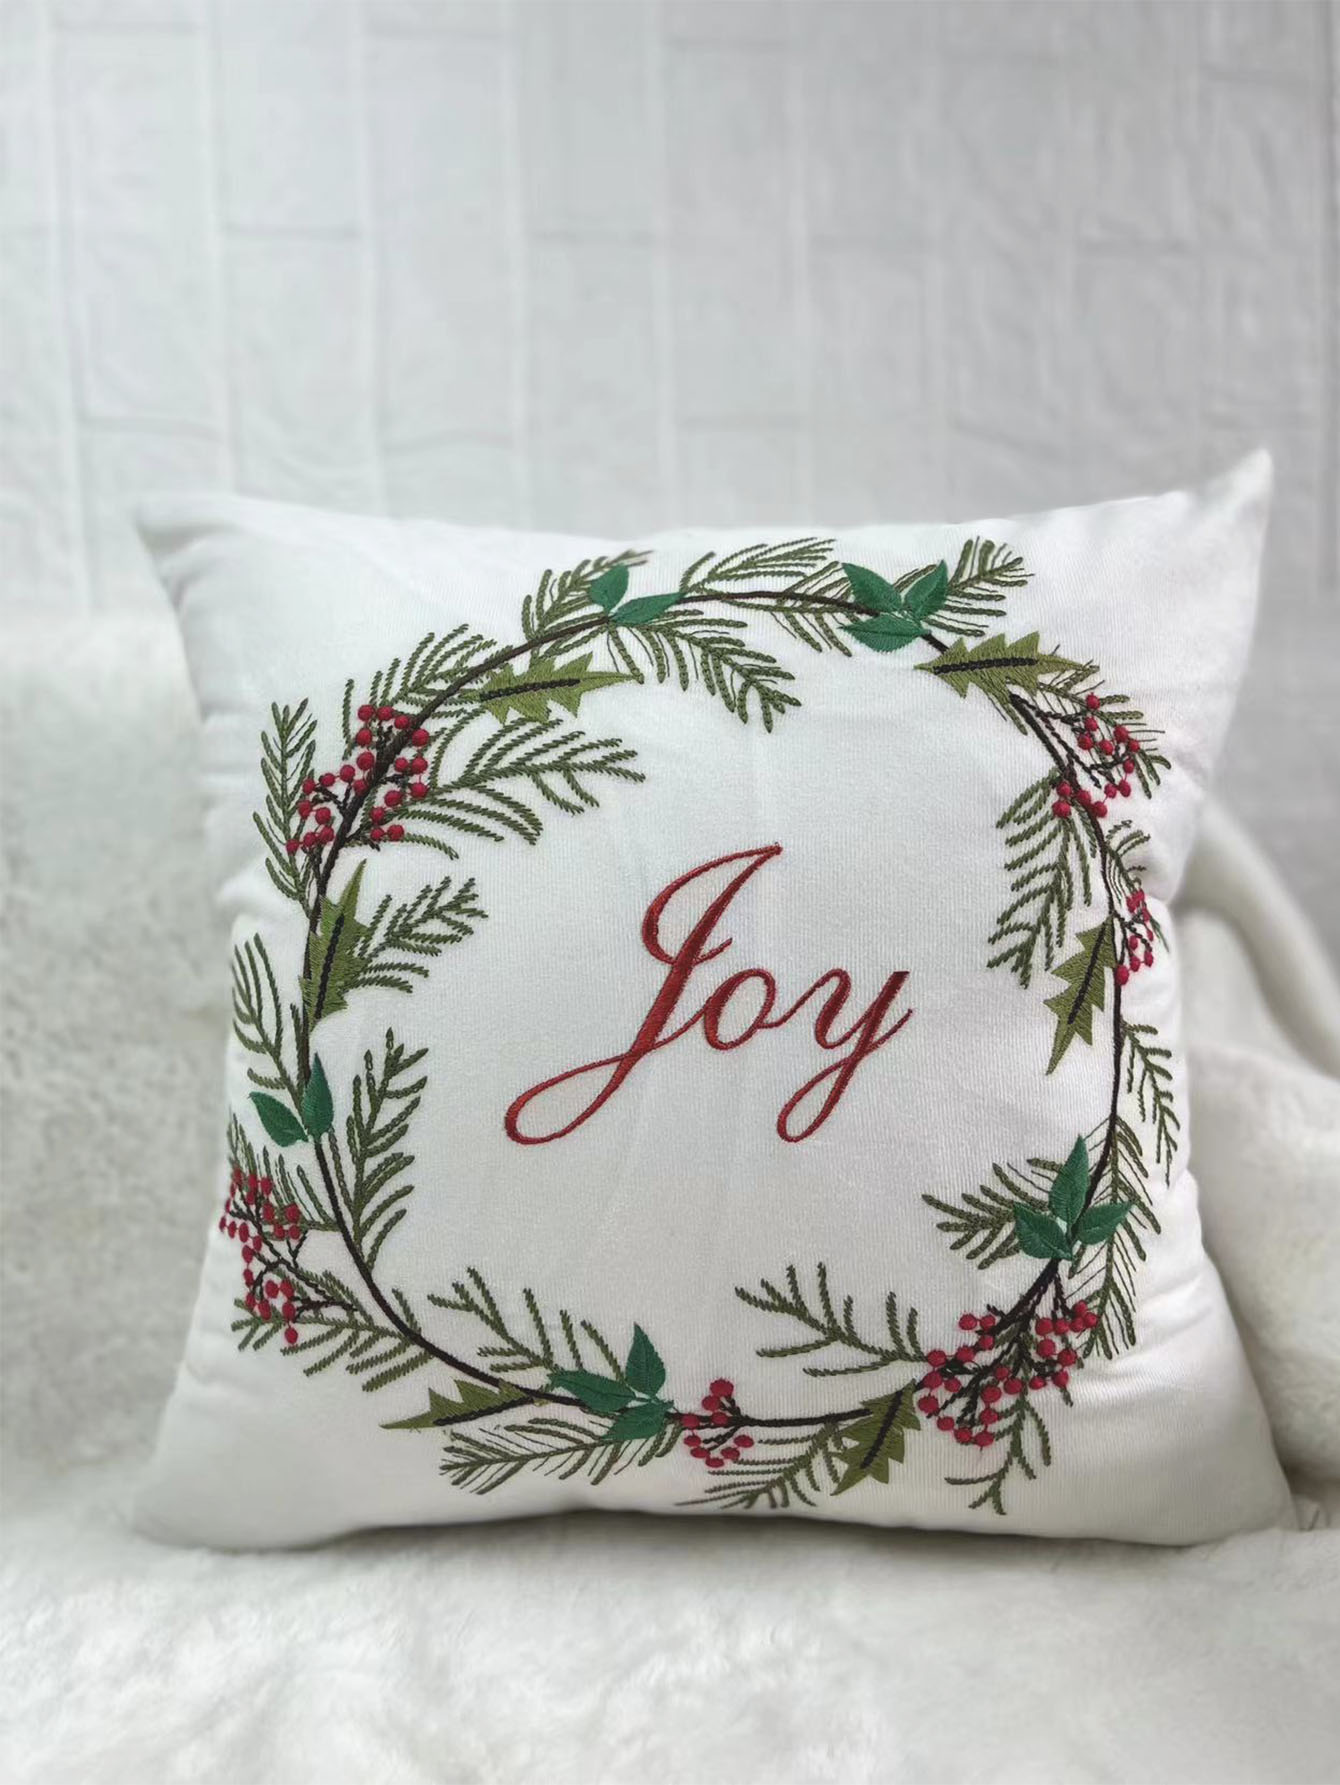 Merry Christmas Embroidered Pillow